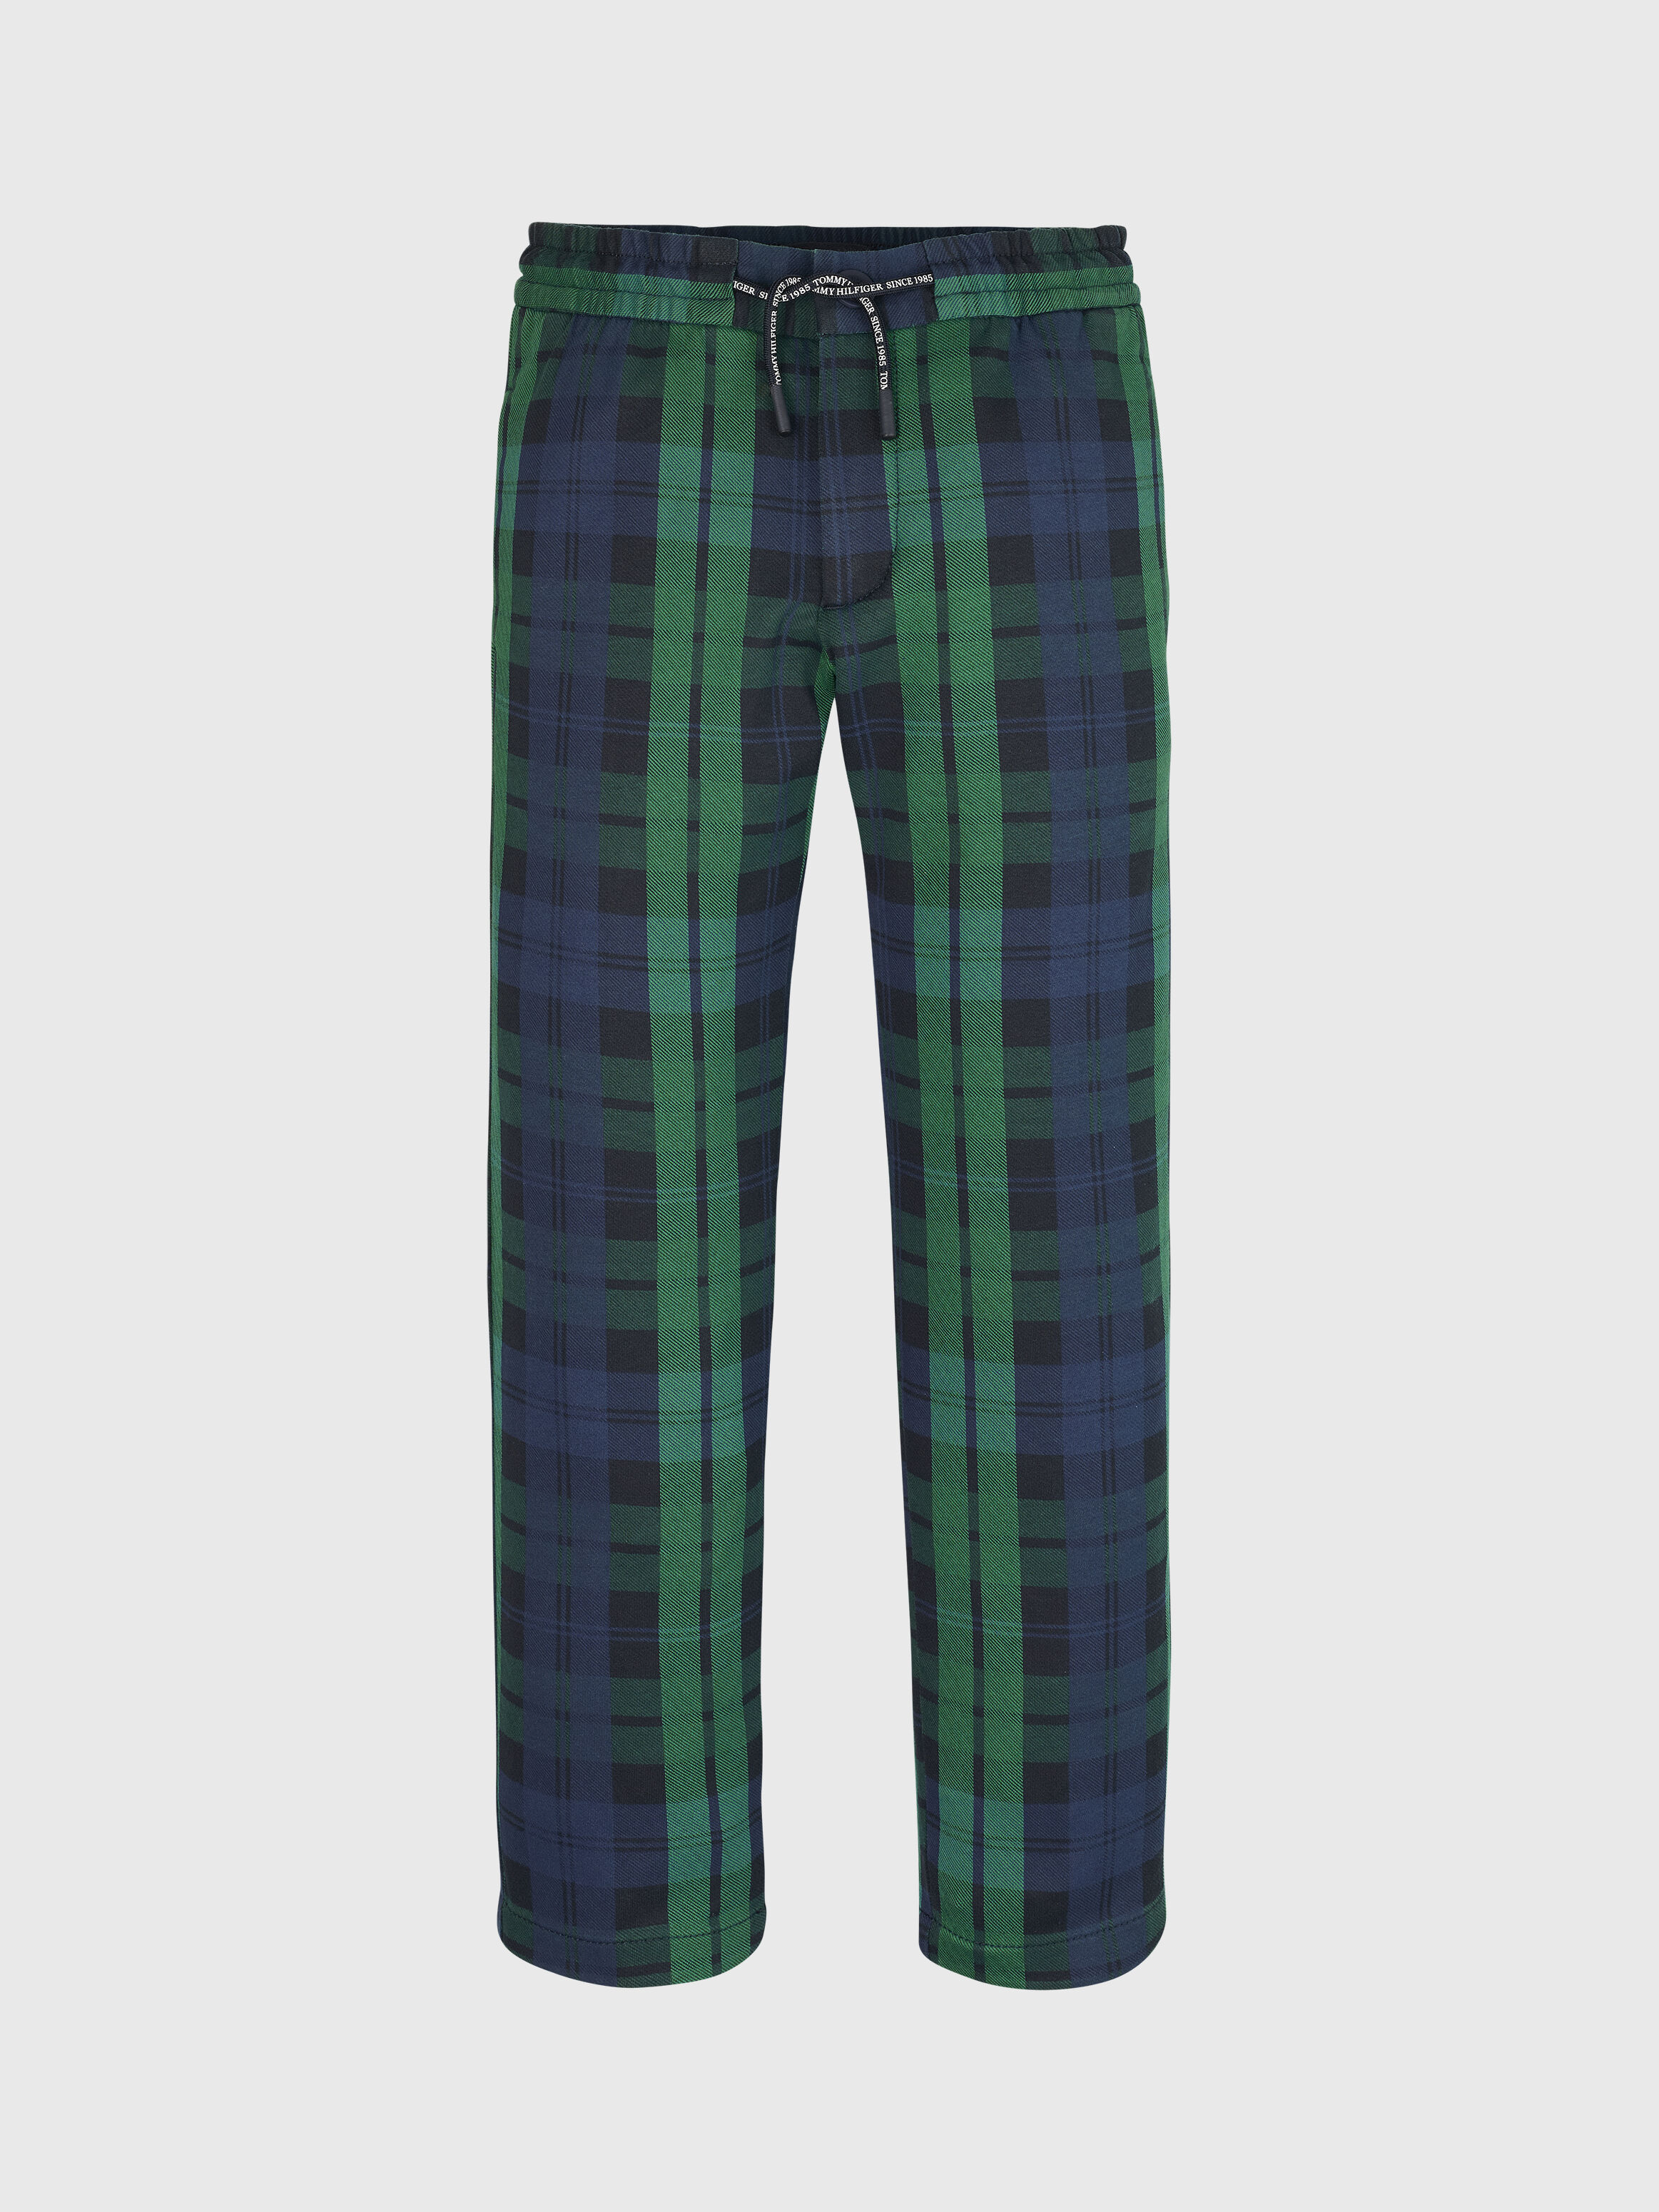 Gents Scottish Black Watch Tartan Trousers Available in Various Sizes | eBay